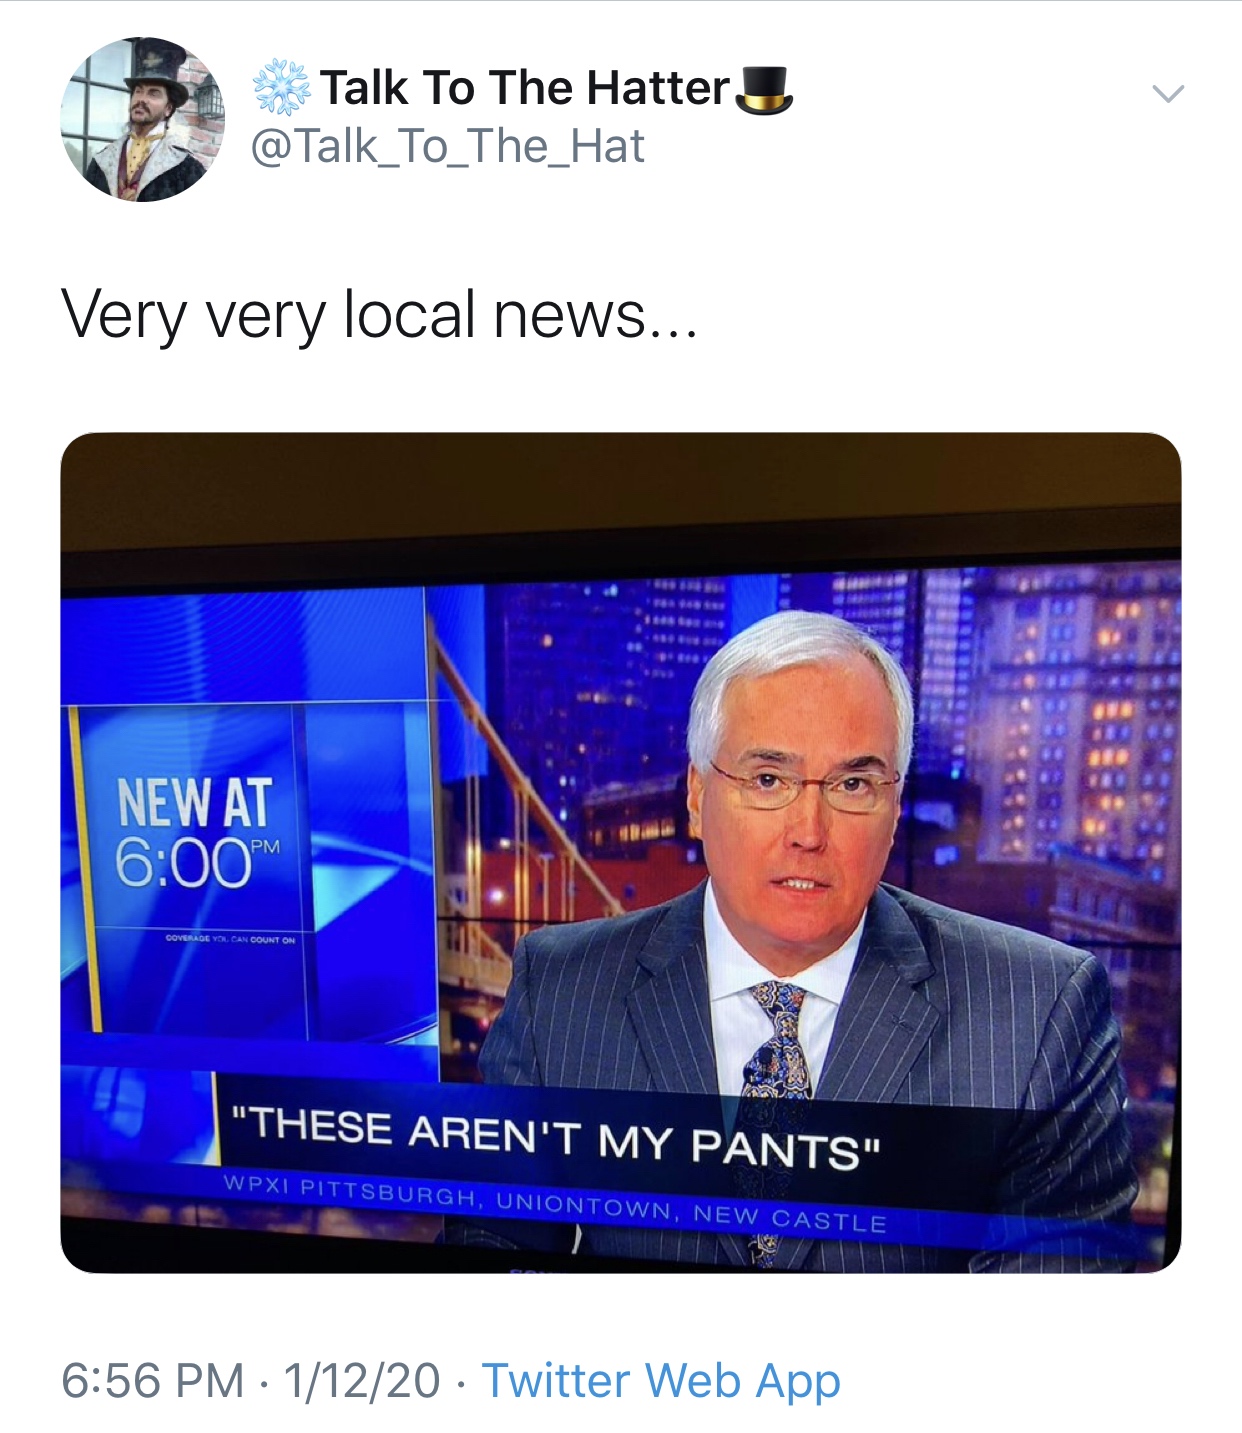 display device - Talk To The Hatter Very very local news... New At M Coverage You Can Count On "These Aren'T My Pants". Wpxi Pittsburgh, Uniontown, Newcastle 11220 Twitter Web App